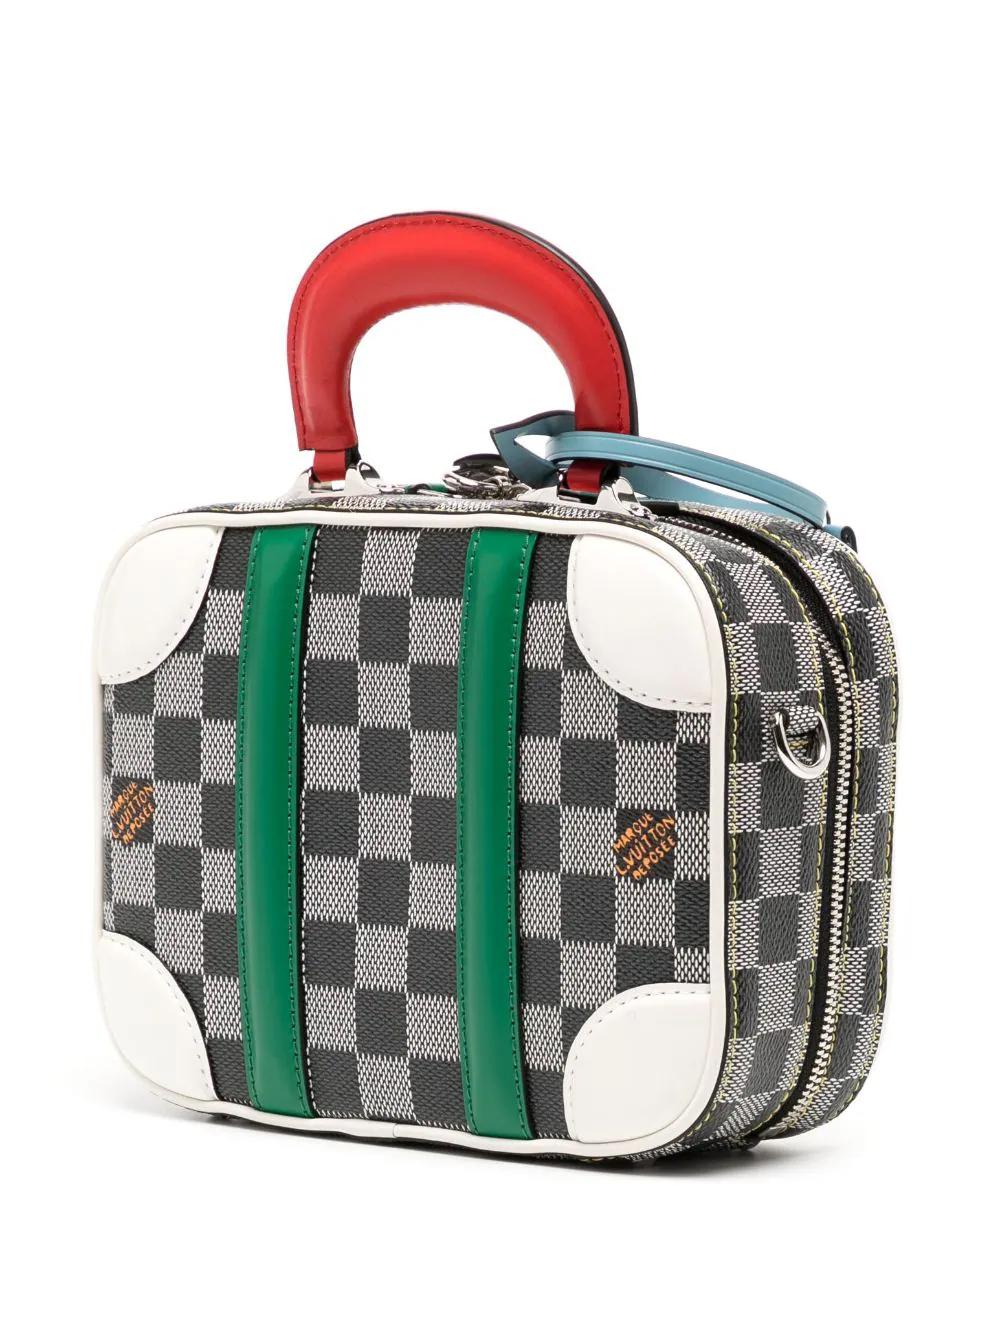 This one-of-a-kind Valisette from Louis Vuitton's Fall/Winter 2019 collection combines classic travel style with modern functionality. It has a two-way zip closure, a vibrant red top handle, and a removable long strap to accommodate your needs. The